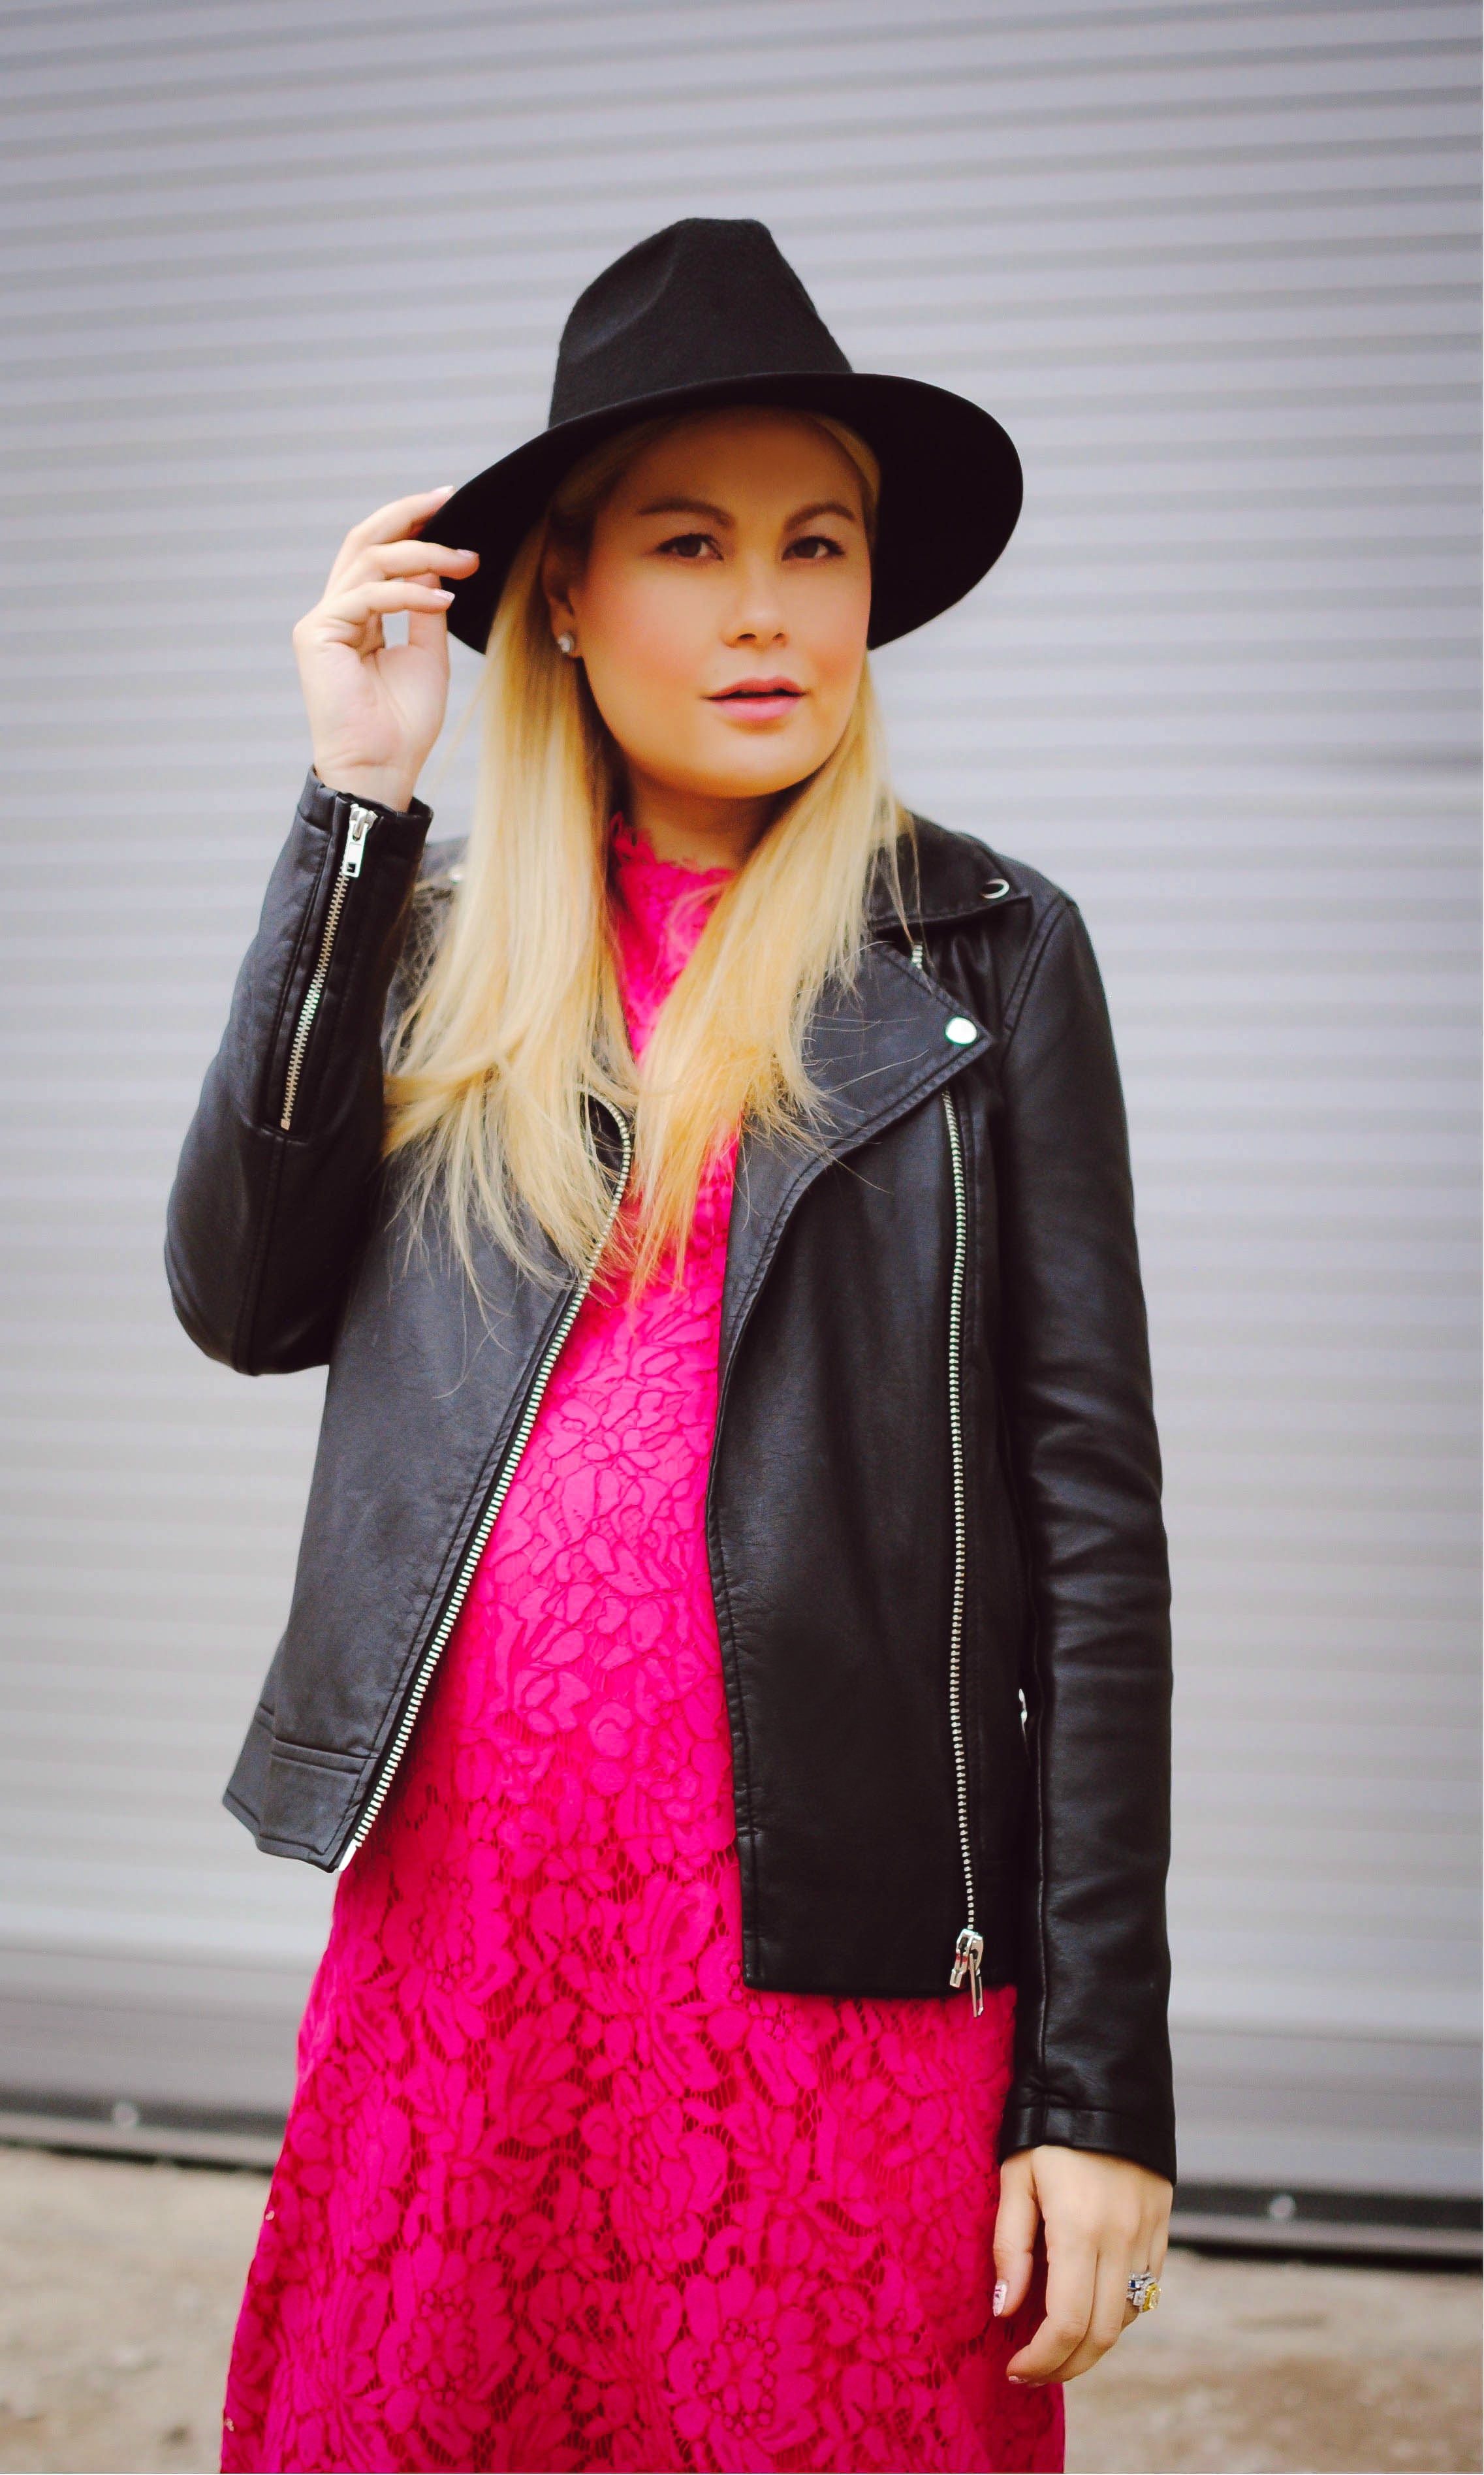 vanessa-lambert-blogger-behind-what-would-v-wear-wears-a-pink-lace-midi-dress-paired-with-a-moto-jacket-while-32-weeks-pregnant_7